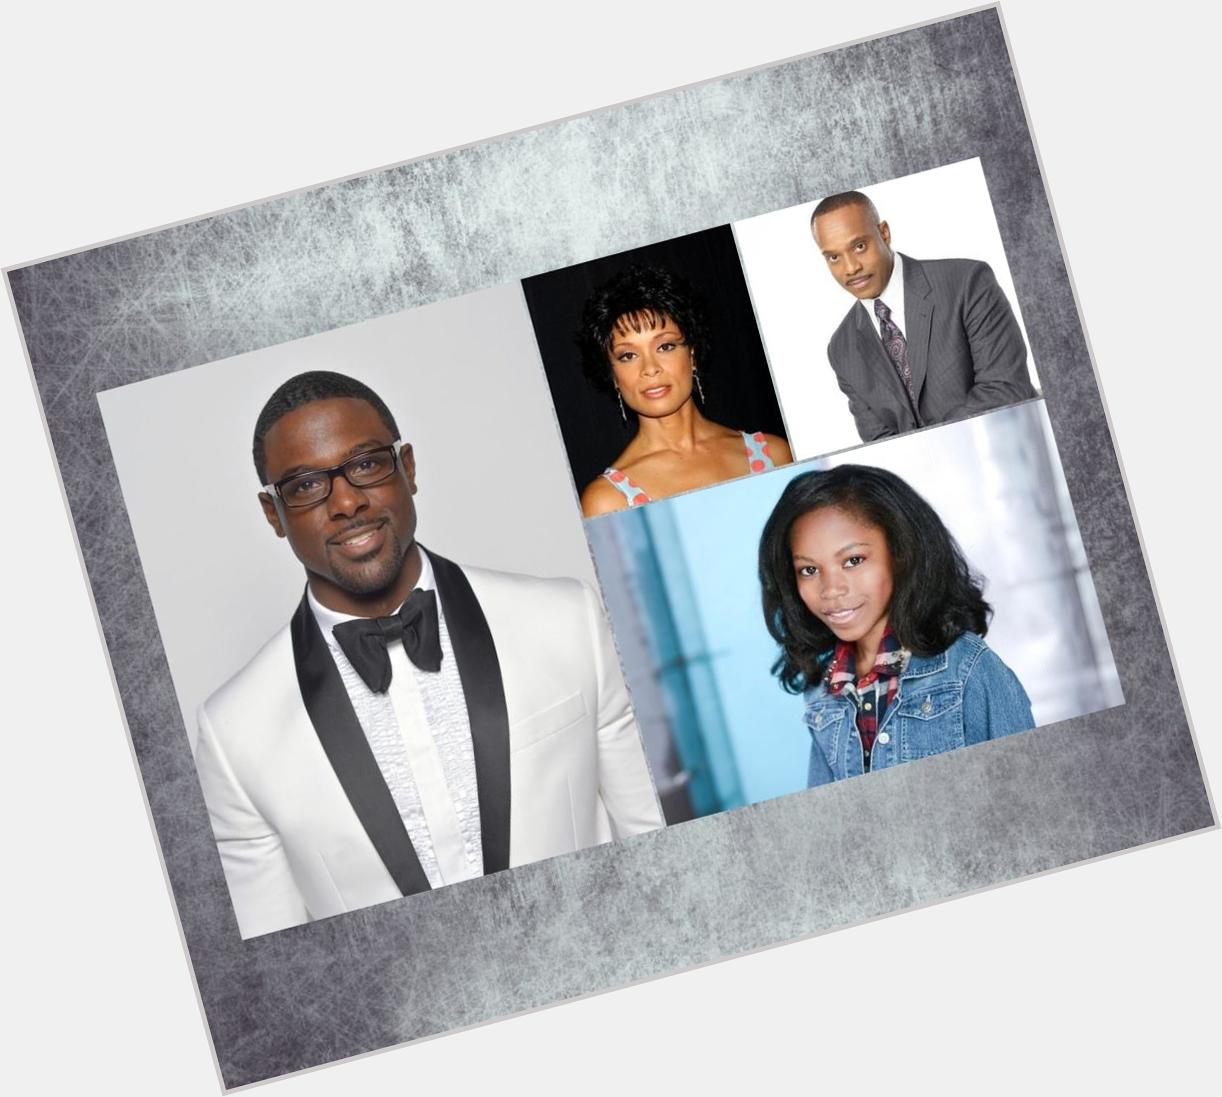  wishes Lance Gross , Riele Downs , Valarie Pettiford , and Rocky Carroll , a very happy birthday. 